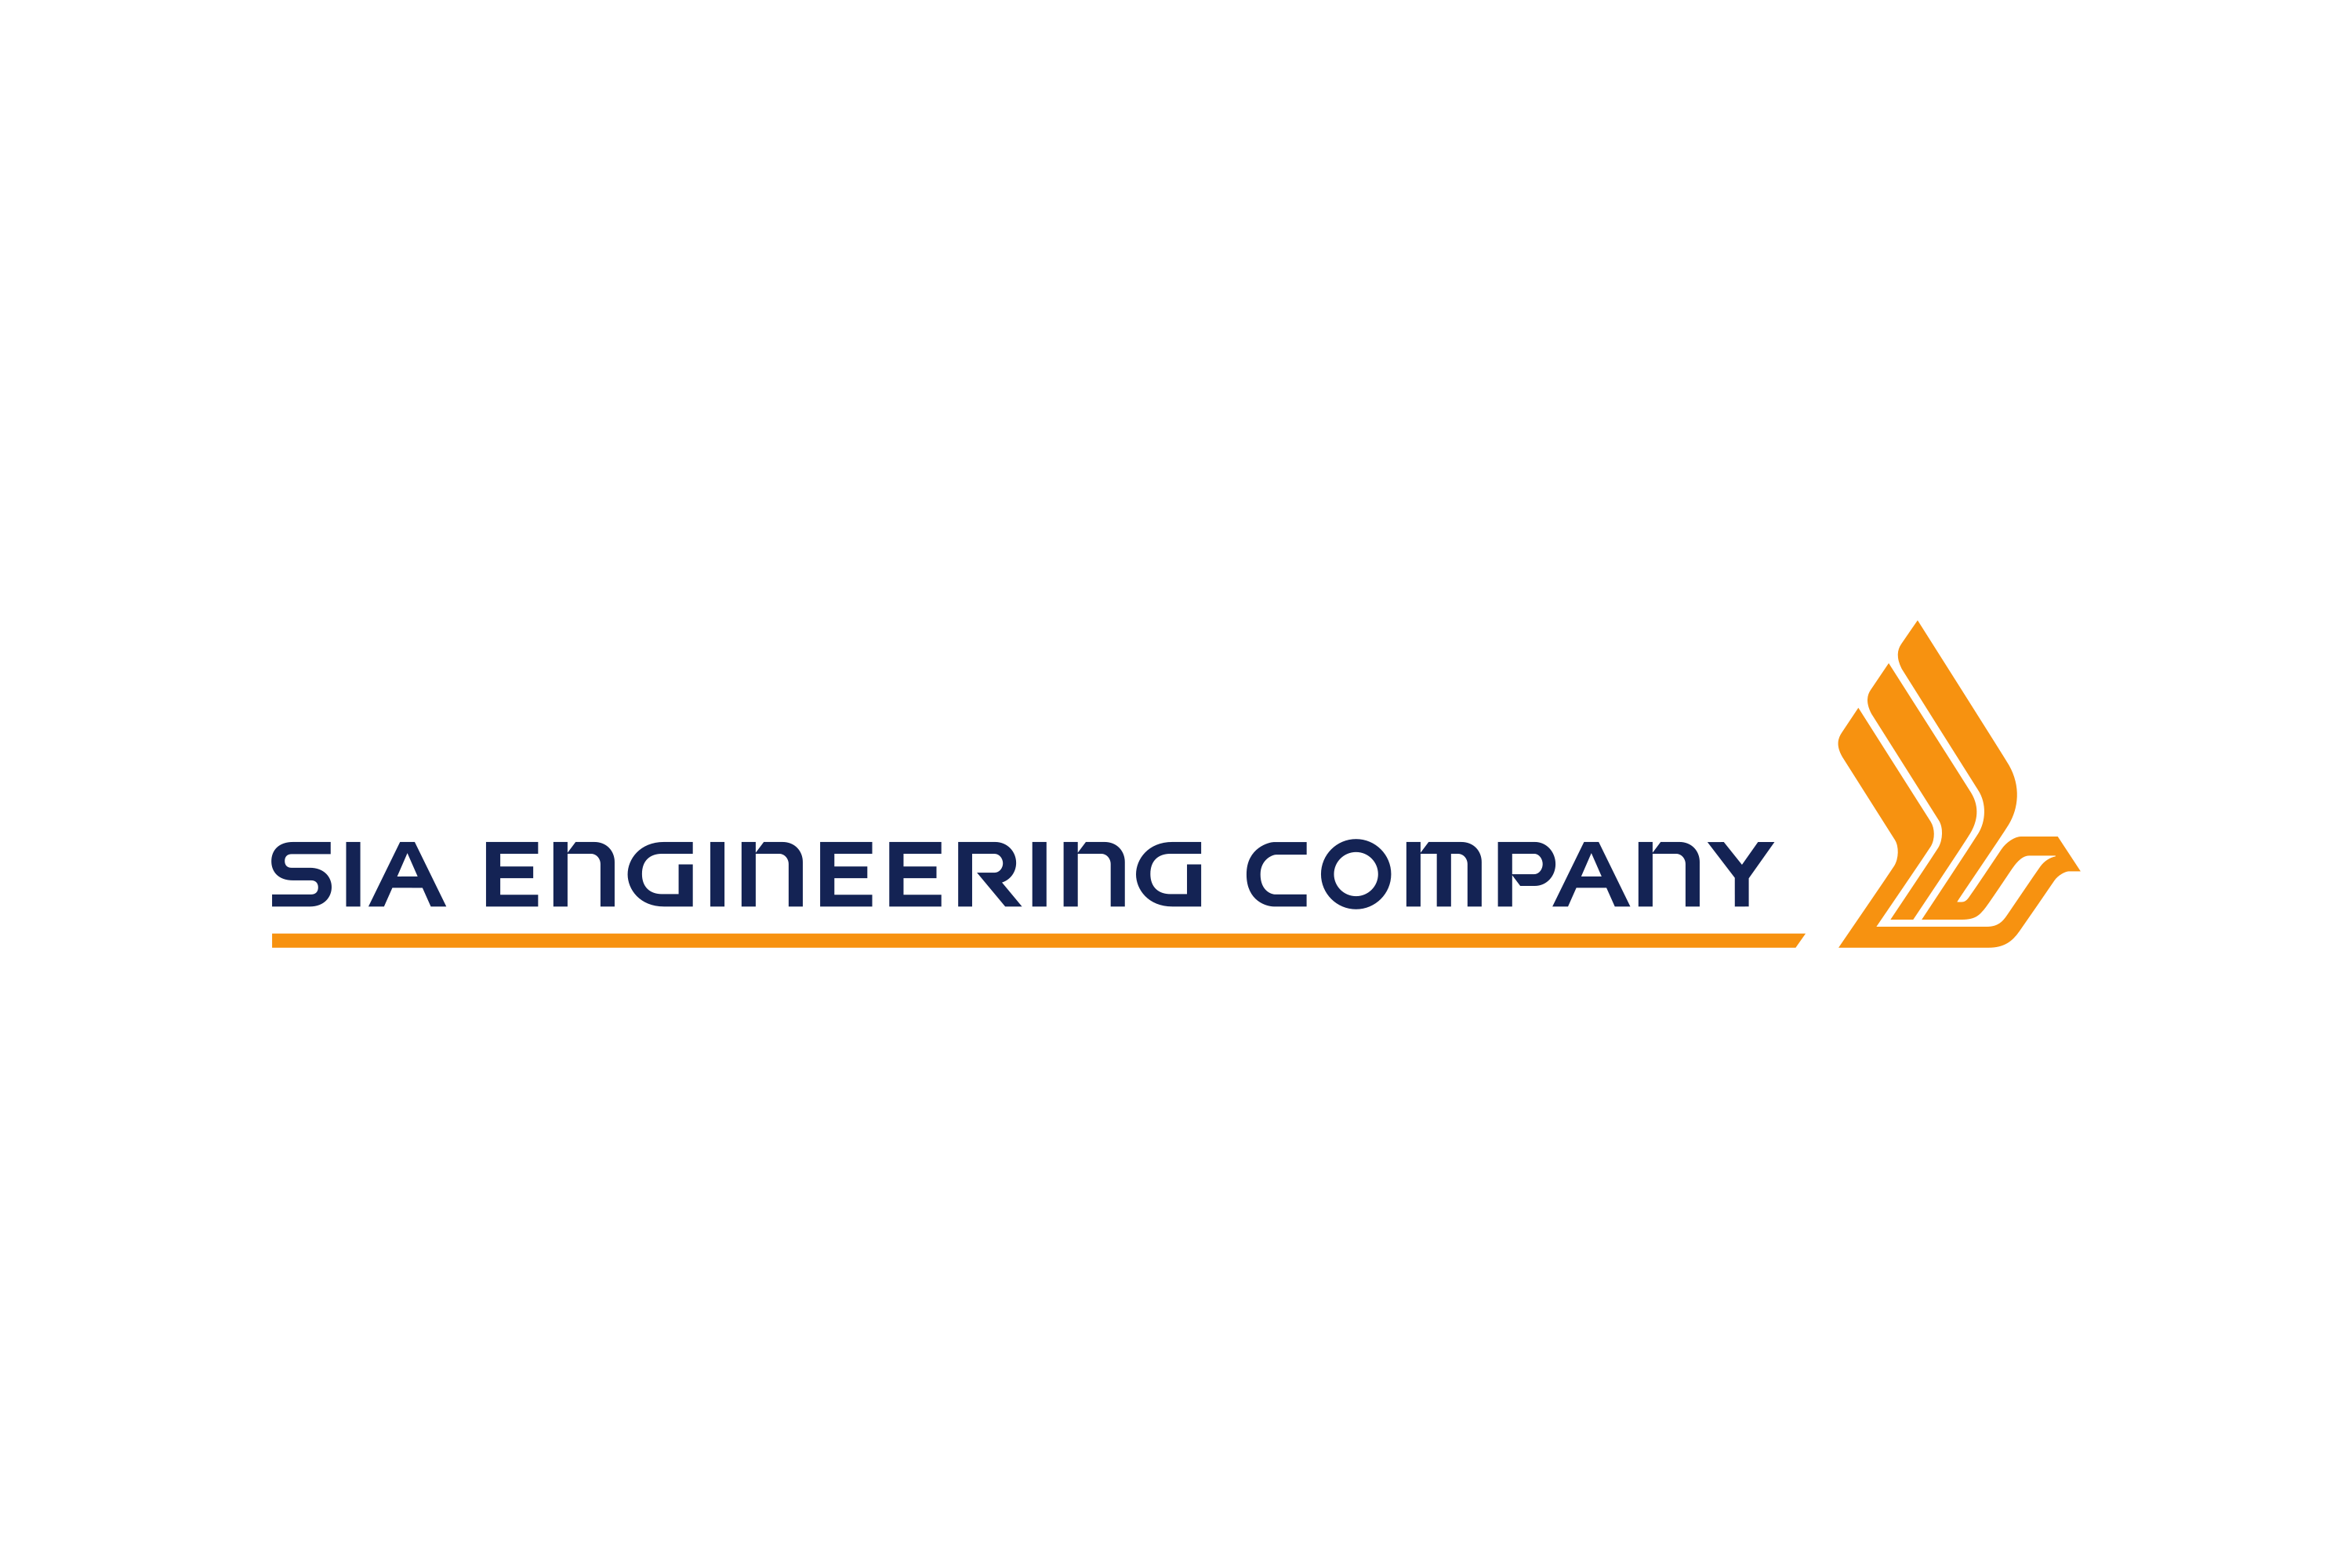 Download SIA Engineering Company Logo in SVG Vector or PNG File Format